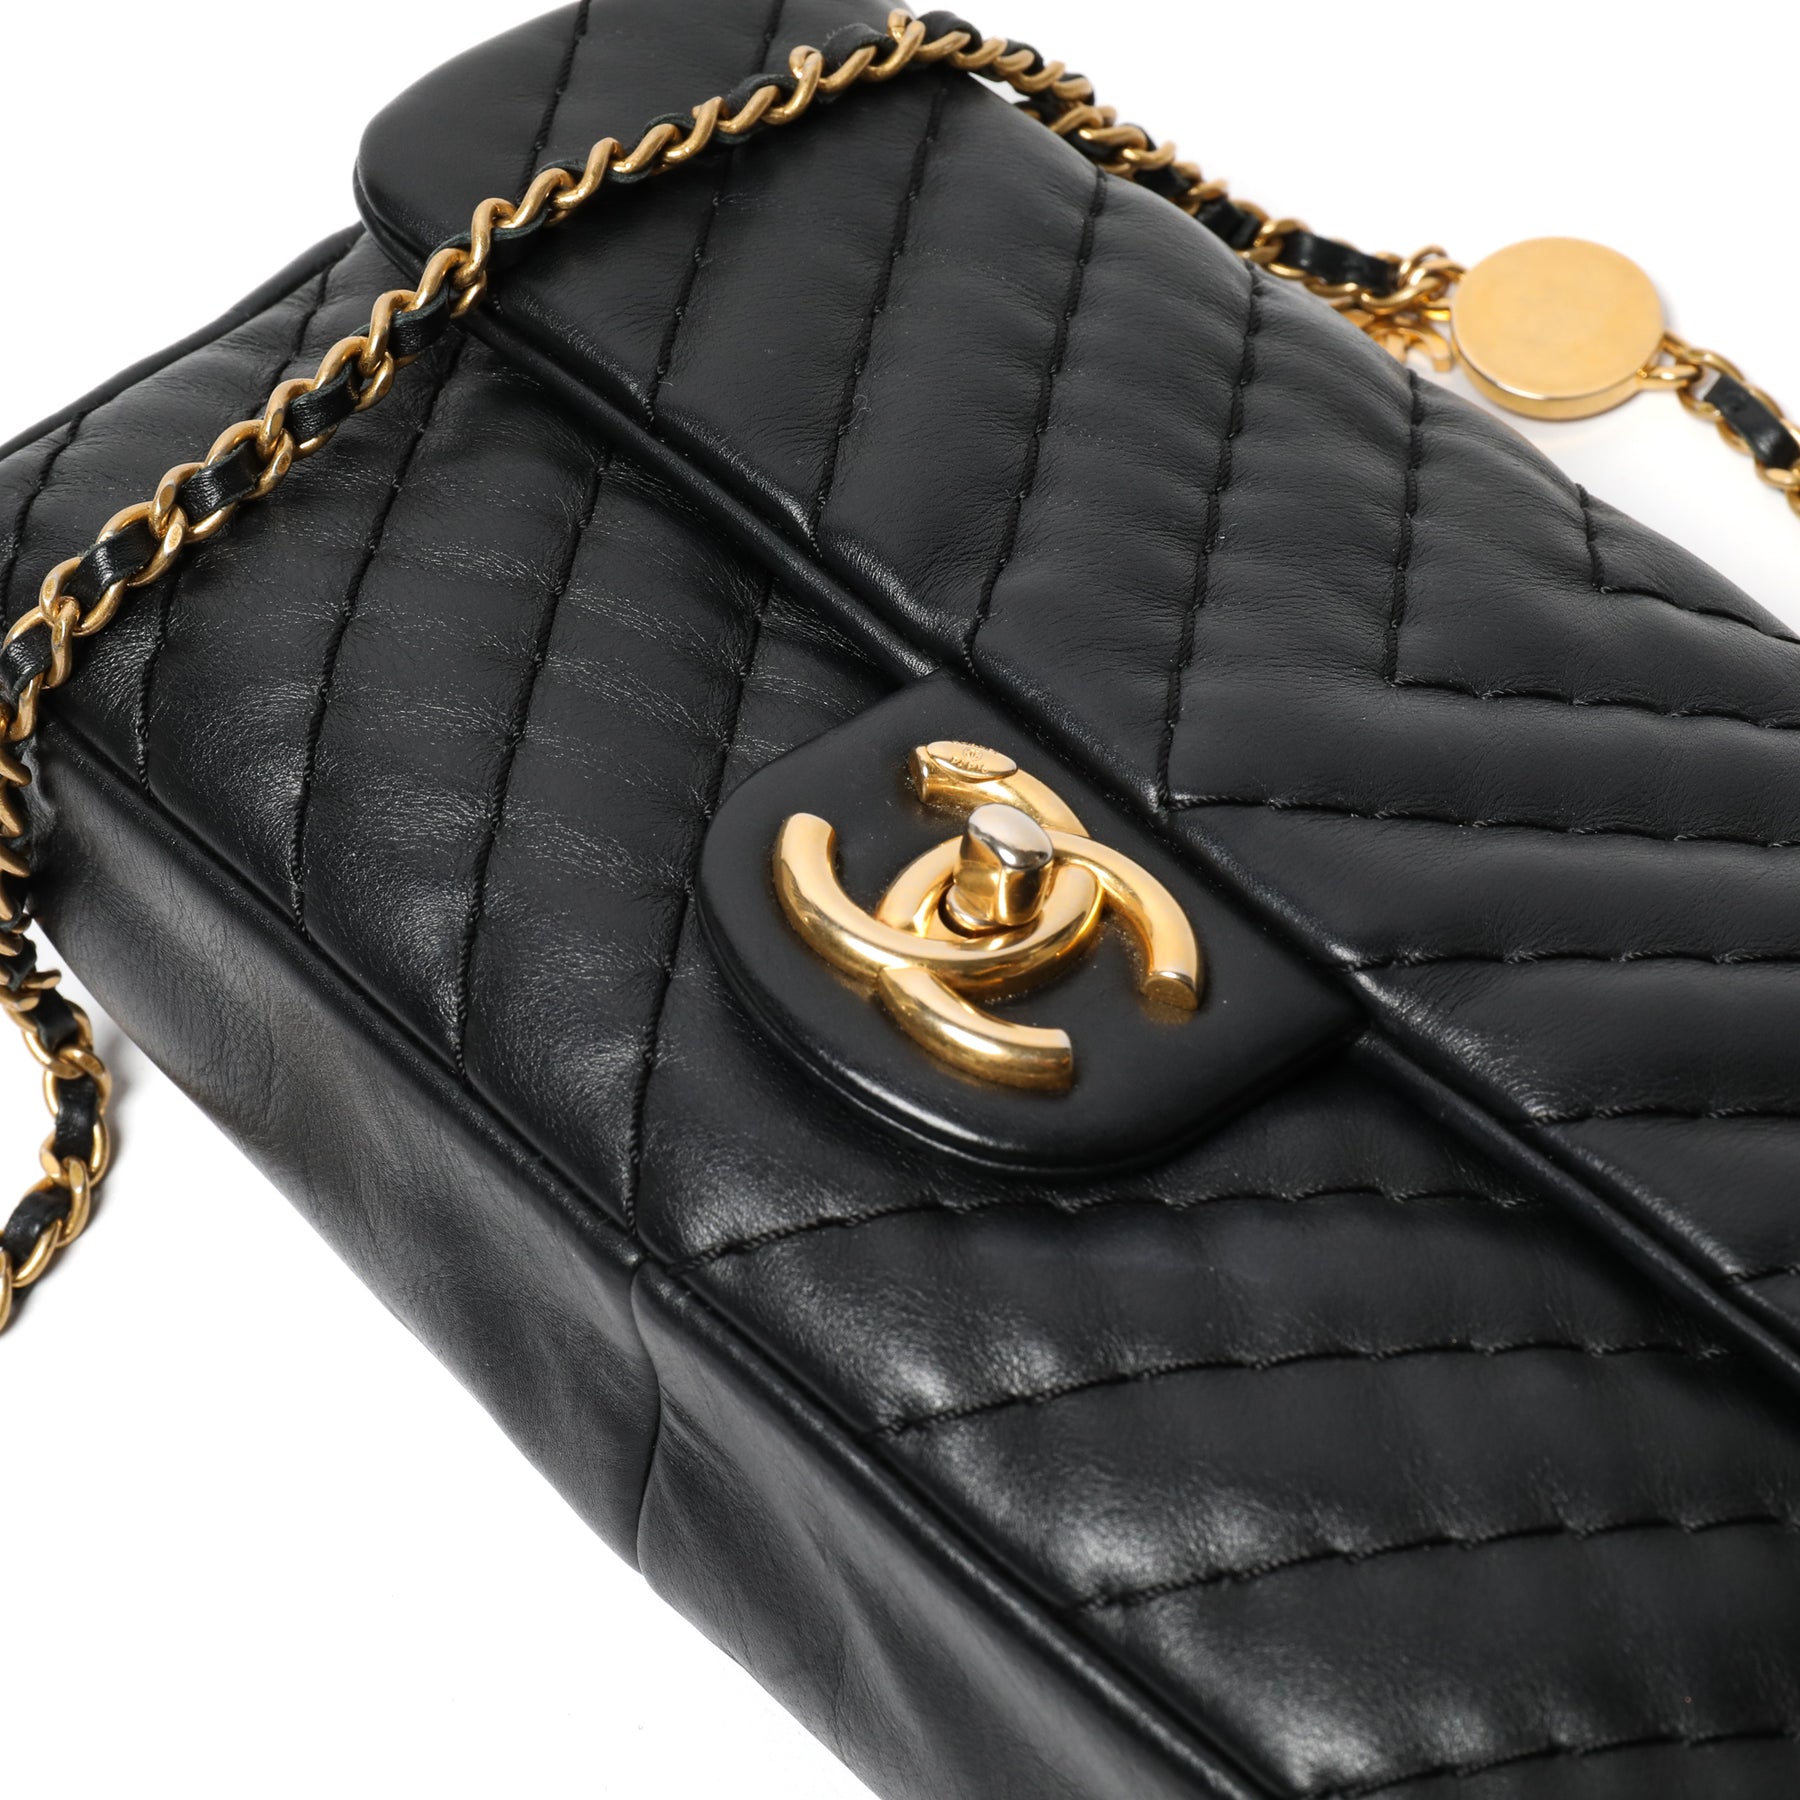 Chanel K28 Chanel 255 105 inch Double Flap Black Quilted Leather 